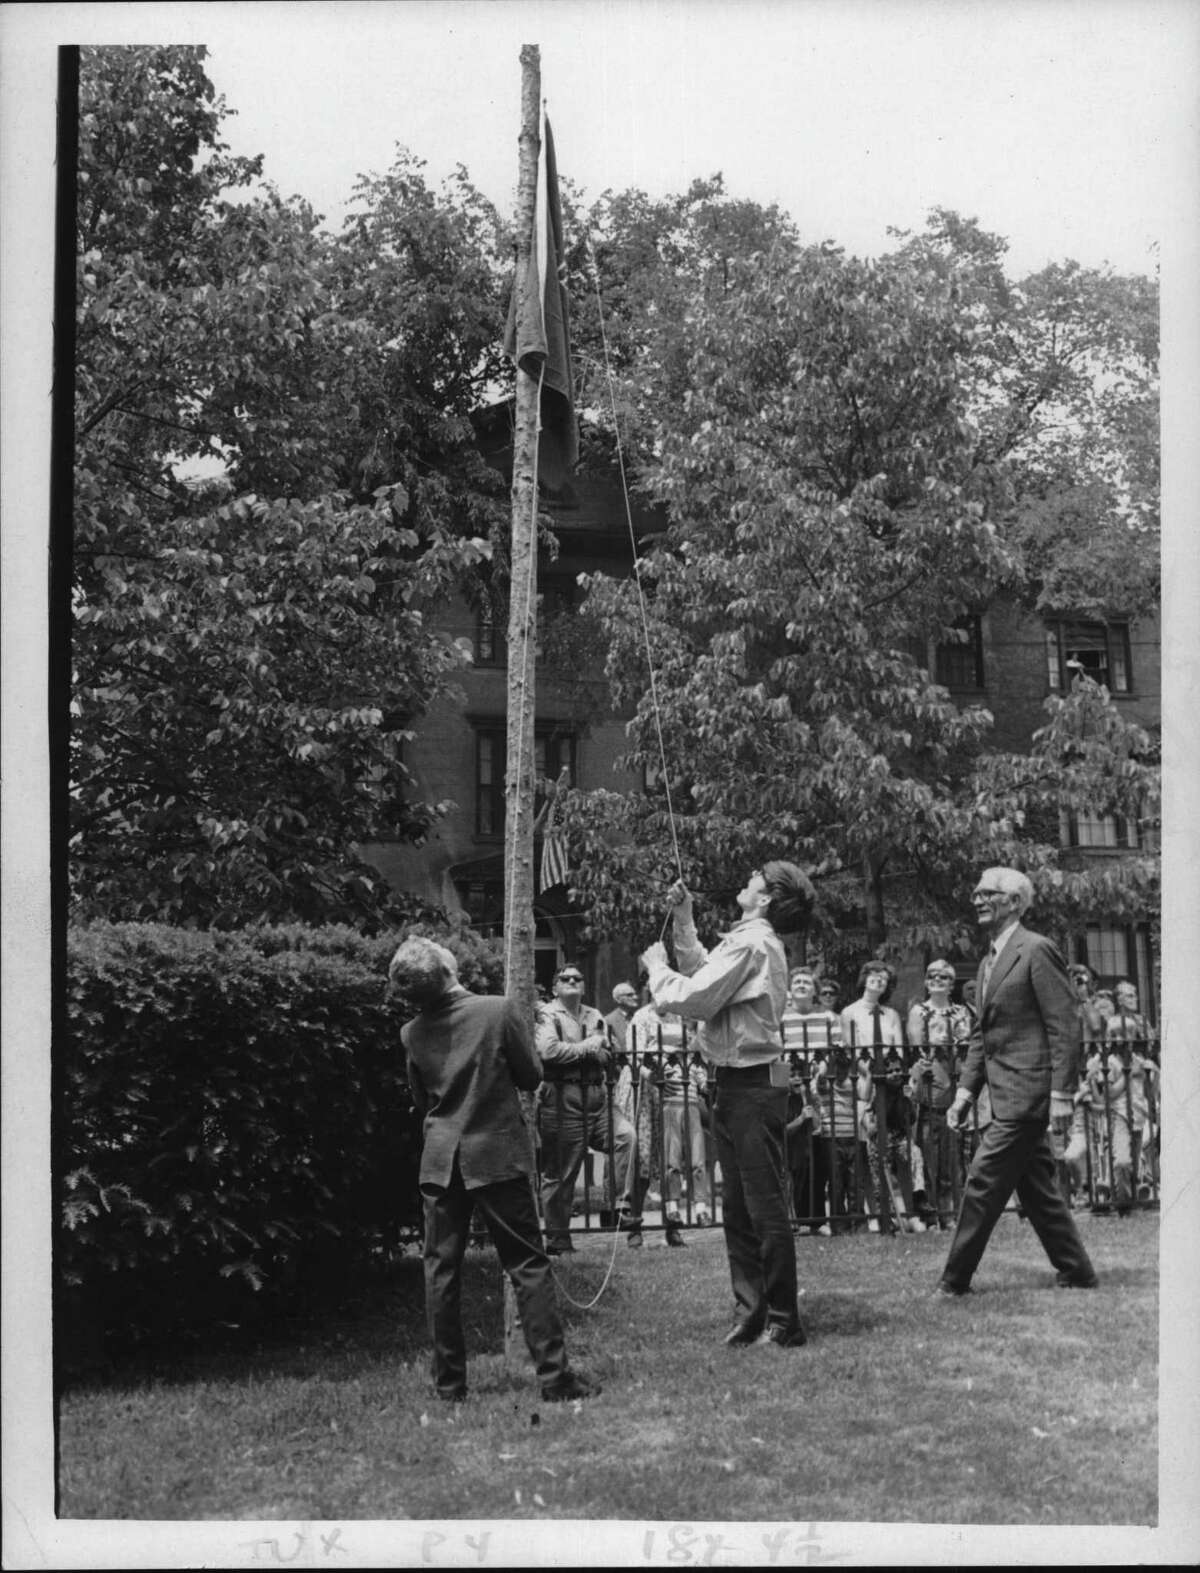 First Reformed Church, Schenectady, New York - Flag Day - replica of 1771 Liberty Flag - Jared Squires of Riverside School, Peter Van Vorst of Galway, and Horace Van Vorst of Schenectady. June 14, 1971 (Paul D. Kniskern, Sr./Times Union Archive)